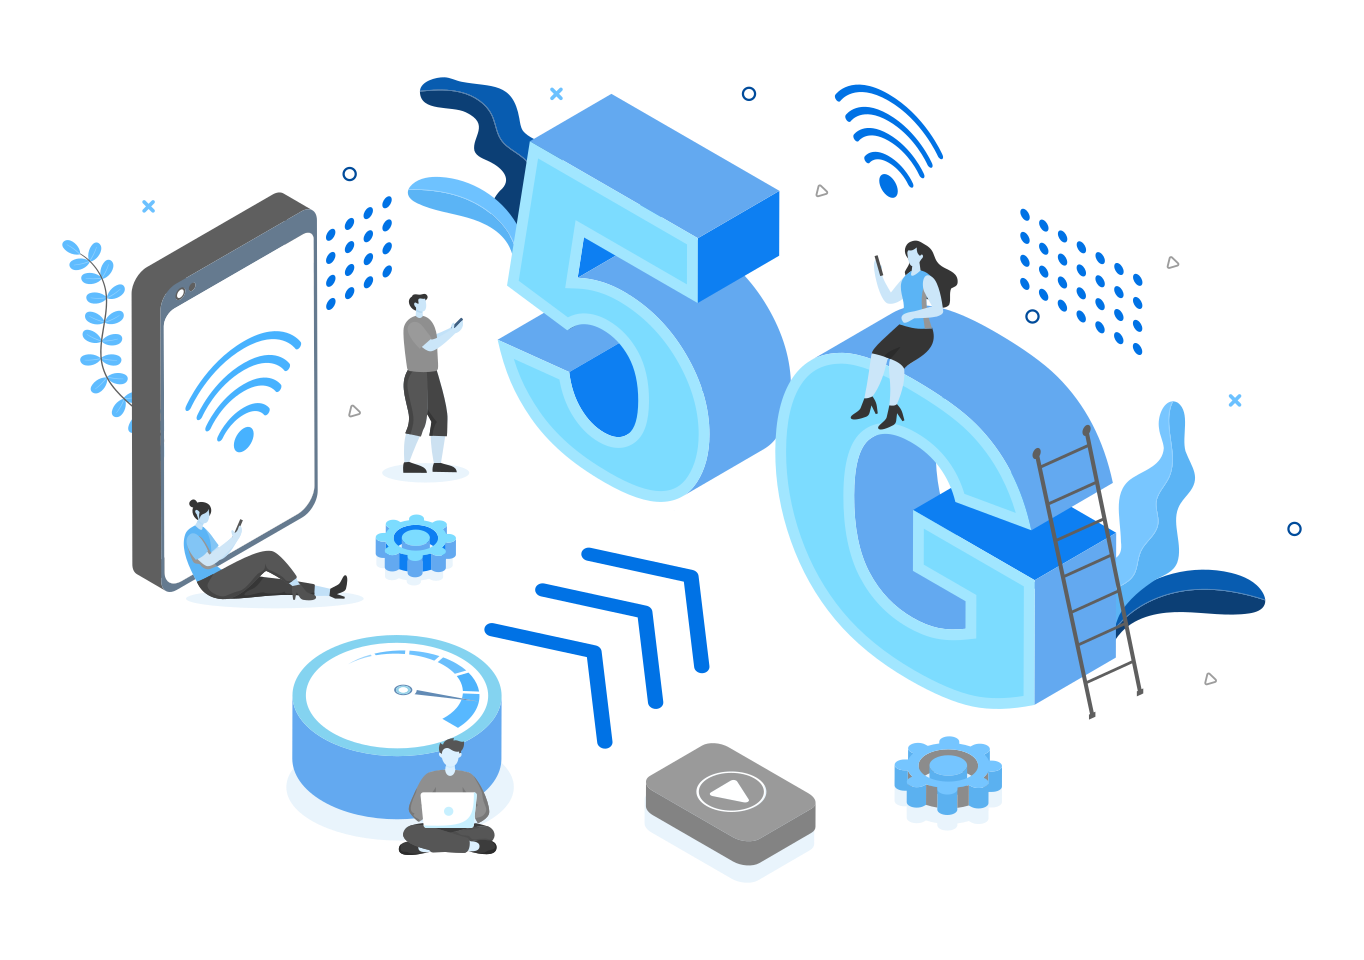 5G icon with telecommunication devoices in the foreground.